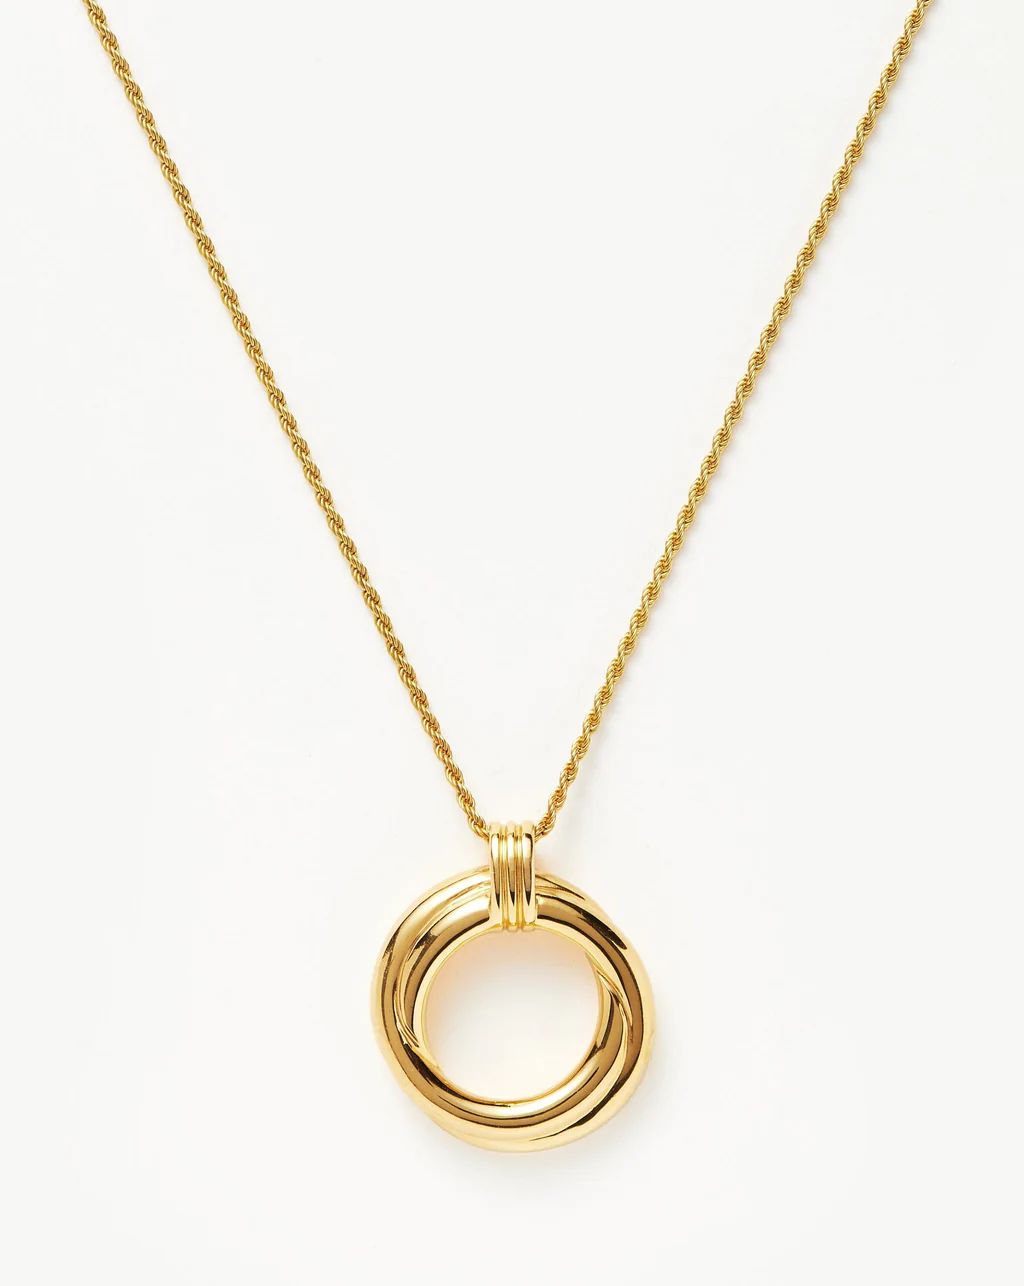 Lucy Williams Entwine Necklace | Missoma